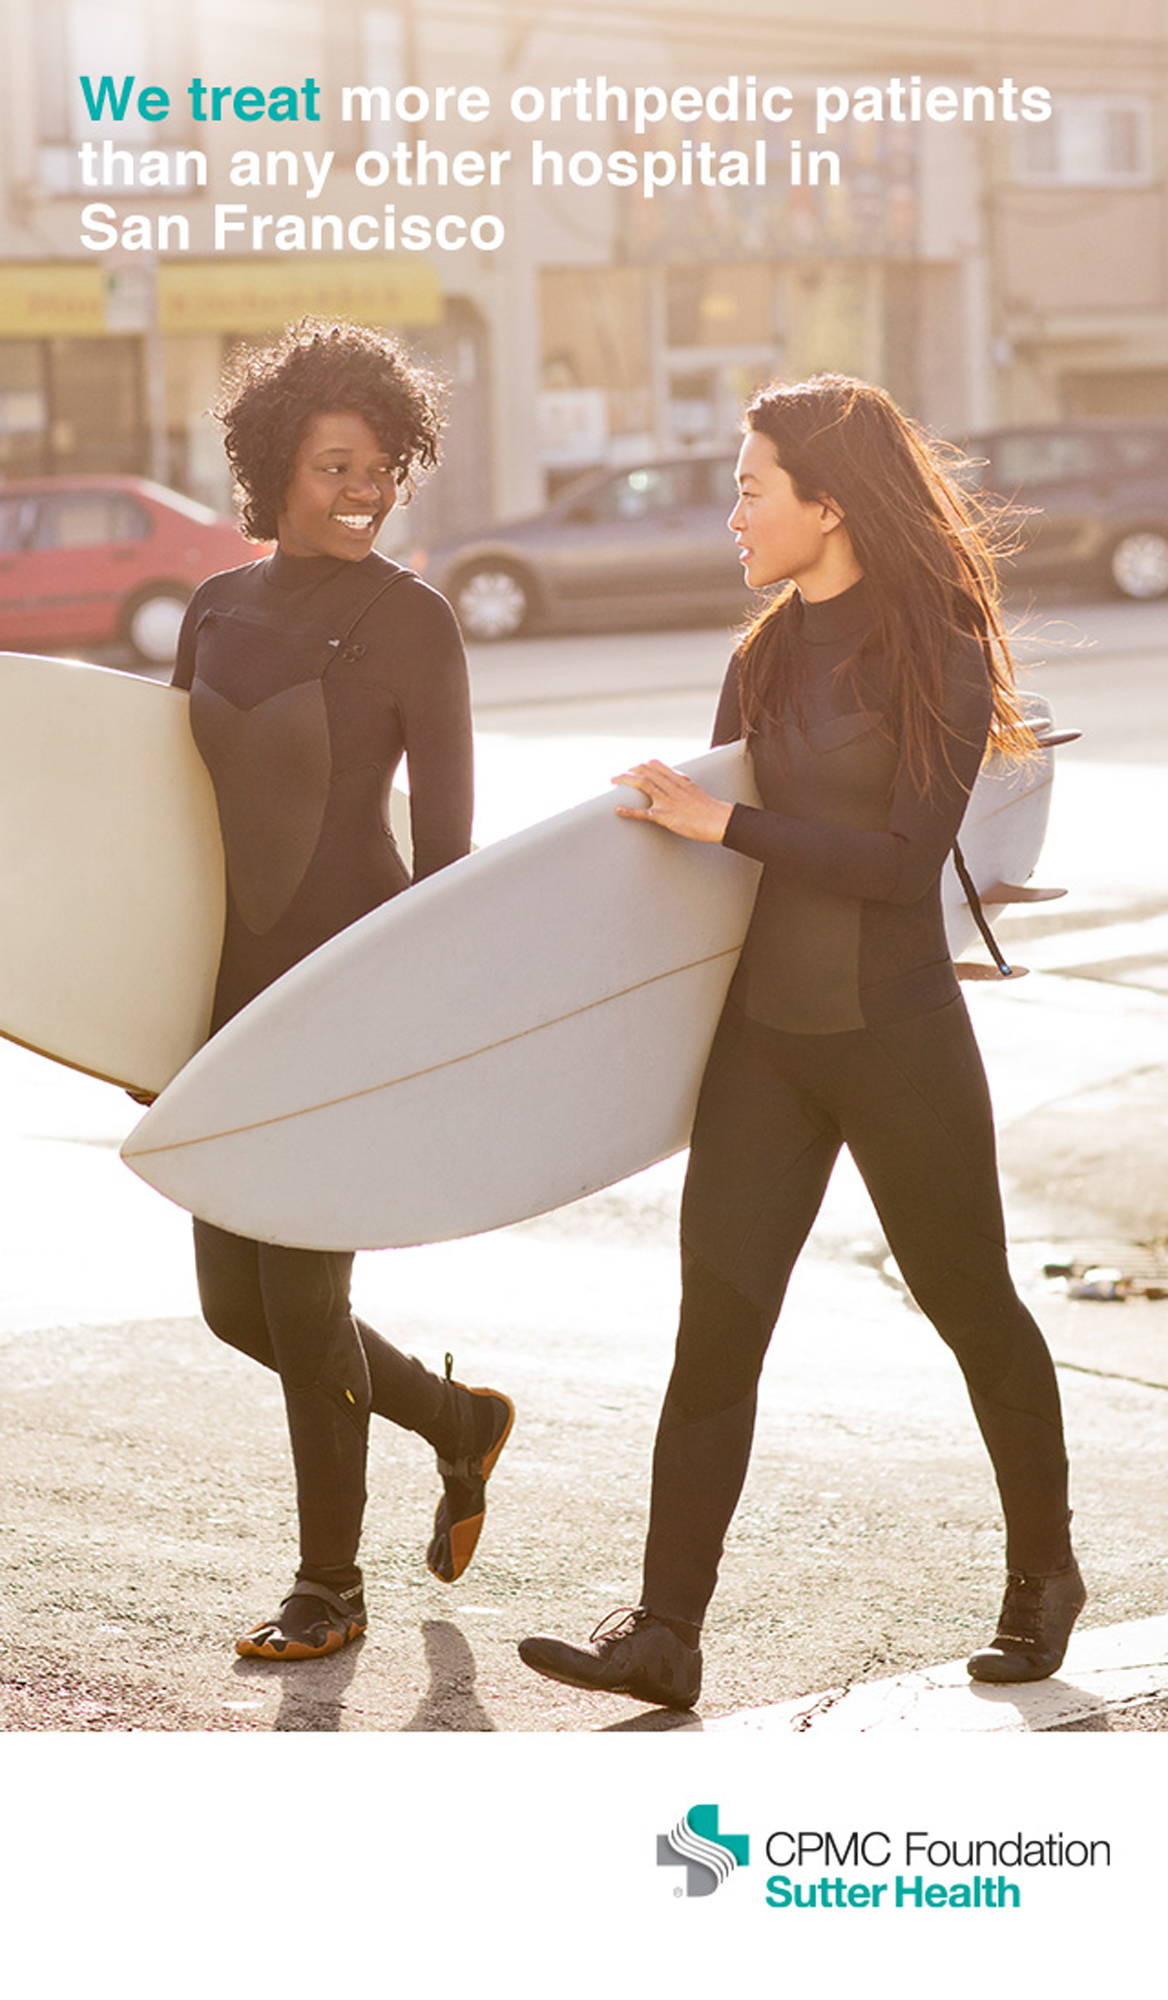 Two women carrying surfboards walk along a city street in a Healthcare Ad Campaign photographed by Lifestyle Photographer Diana Mulvihill